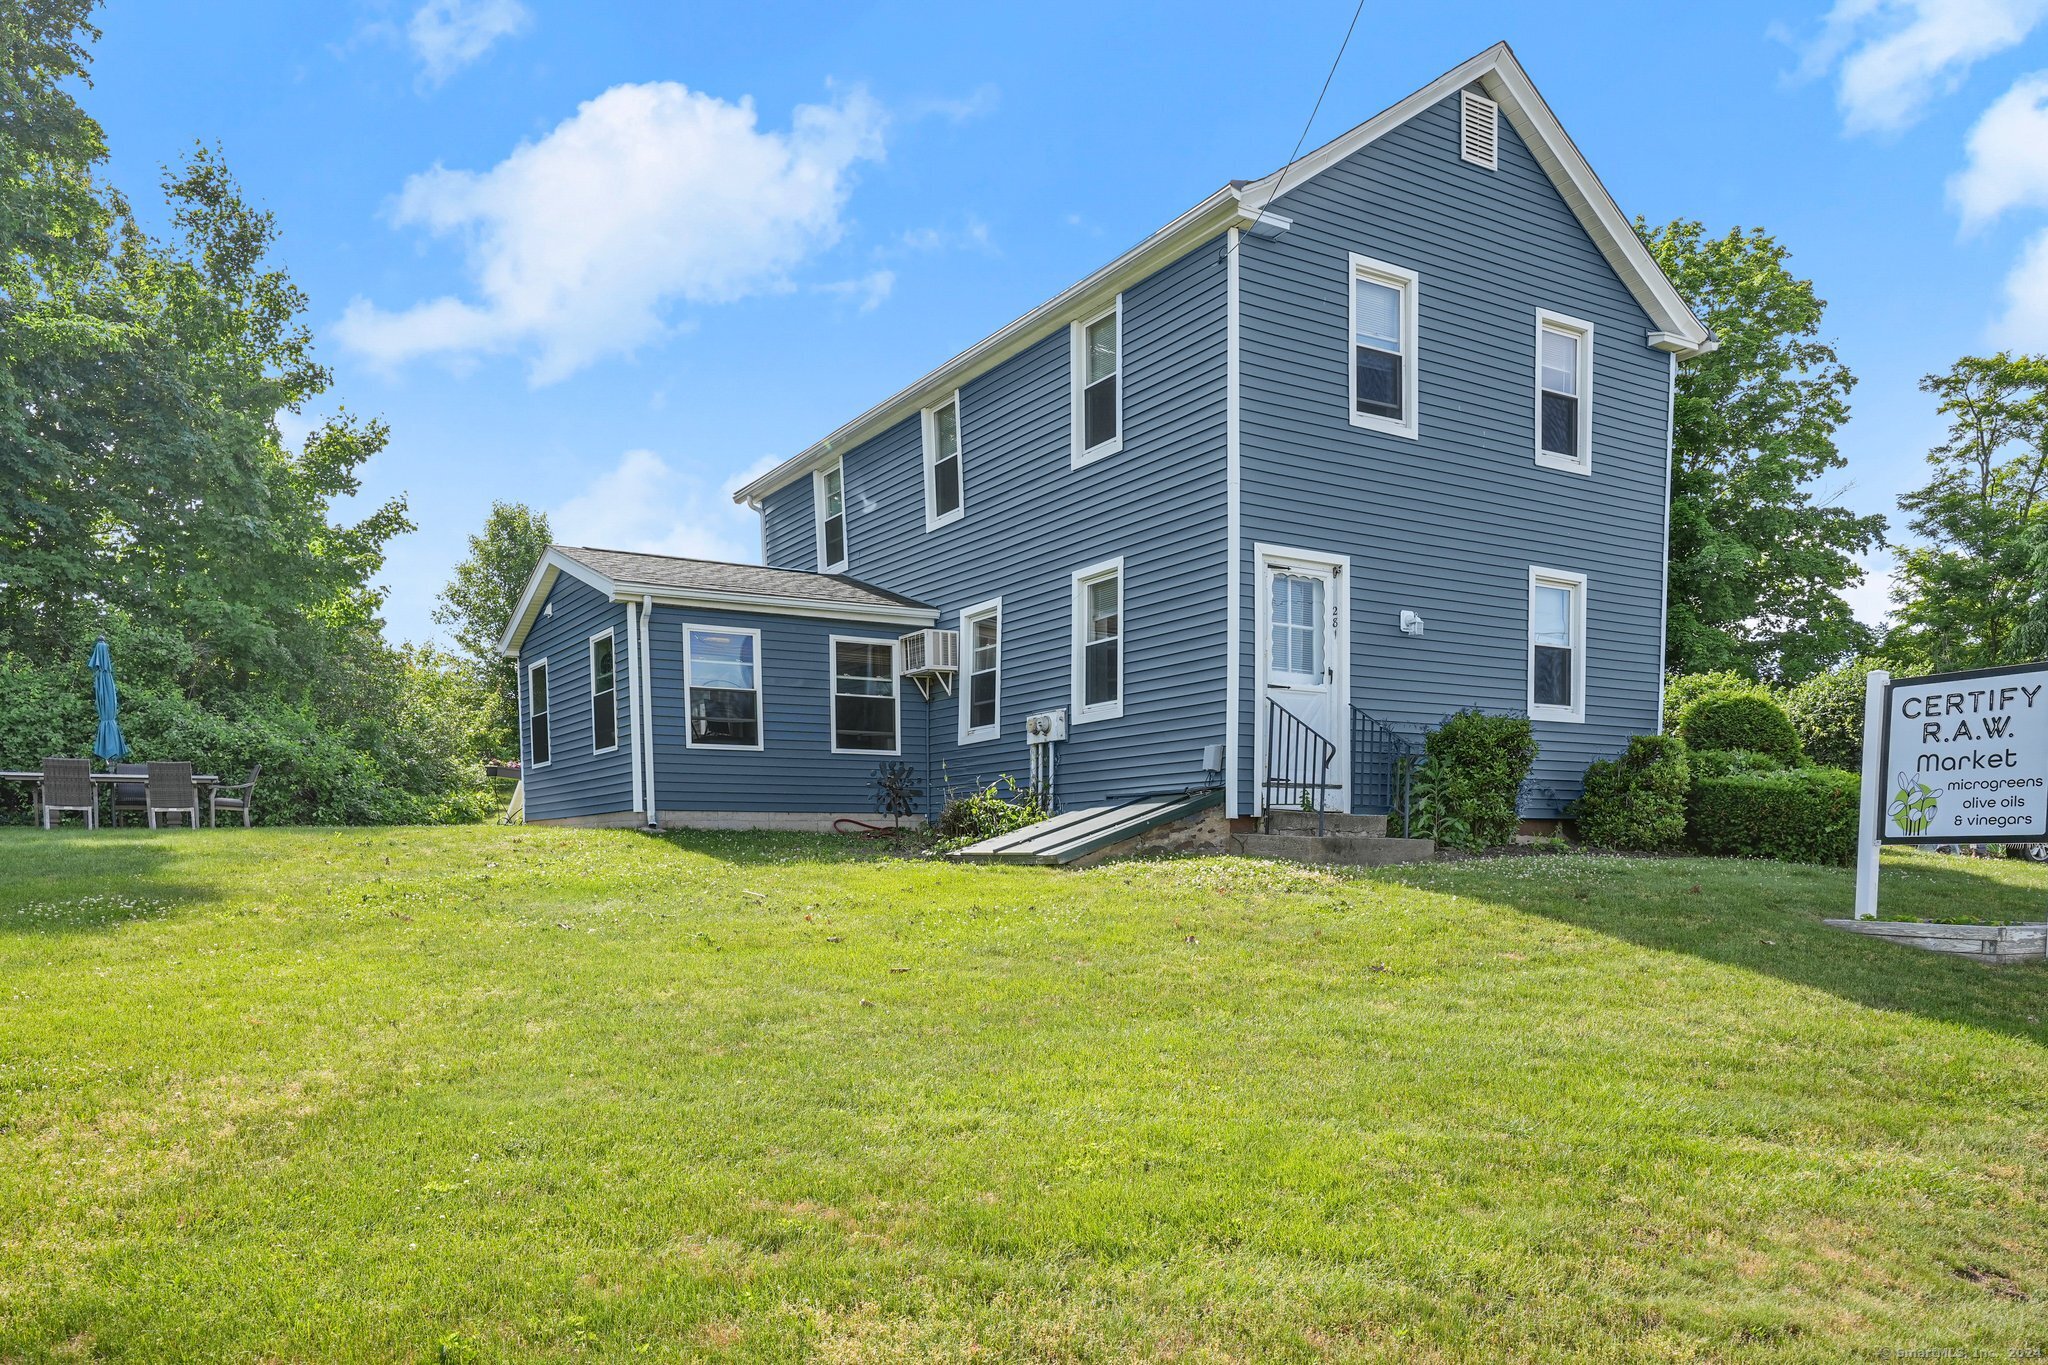 Once the first school house in Granby built in 1767 but don't let that confuse you, the owners have renovated this from stem to stern and made it a beautiful dwelling place to call home!